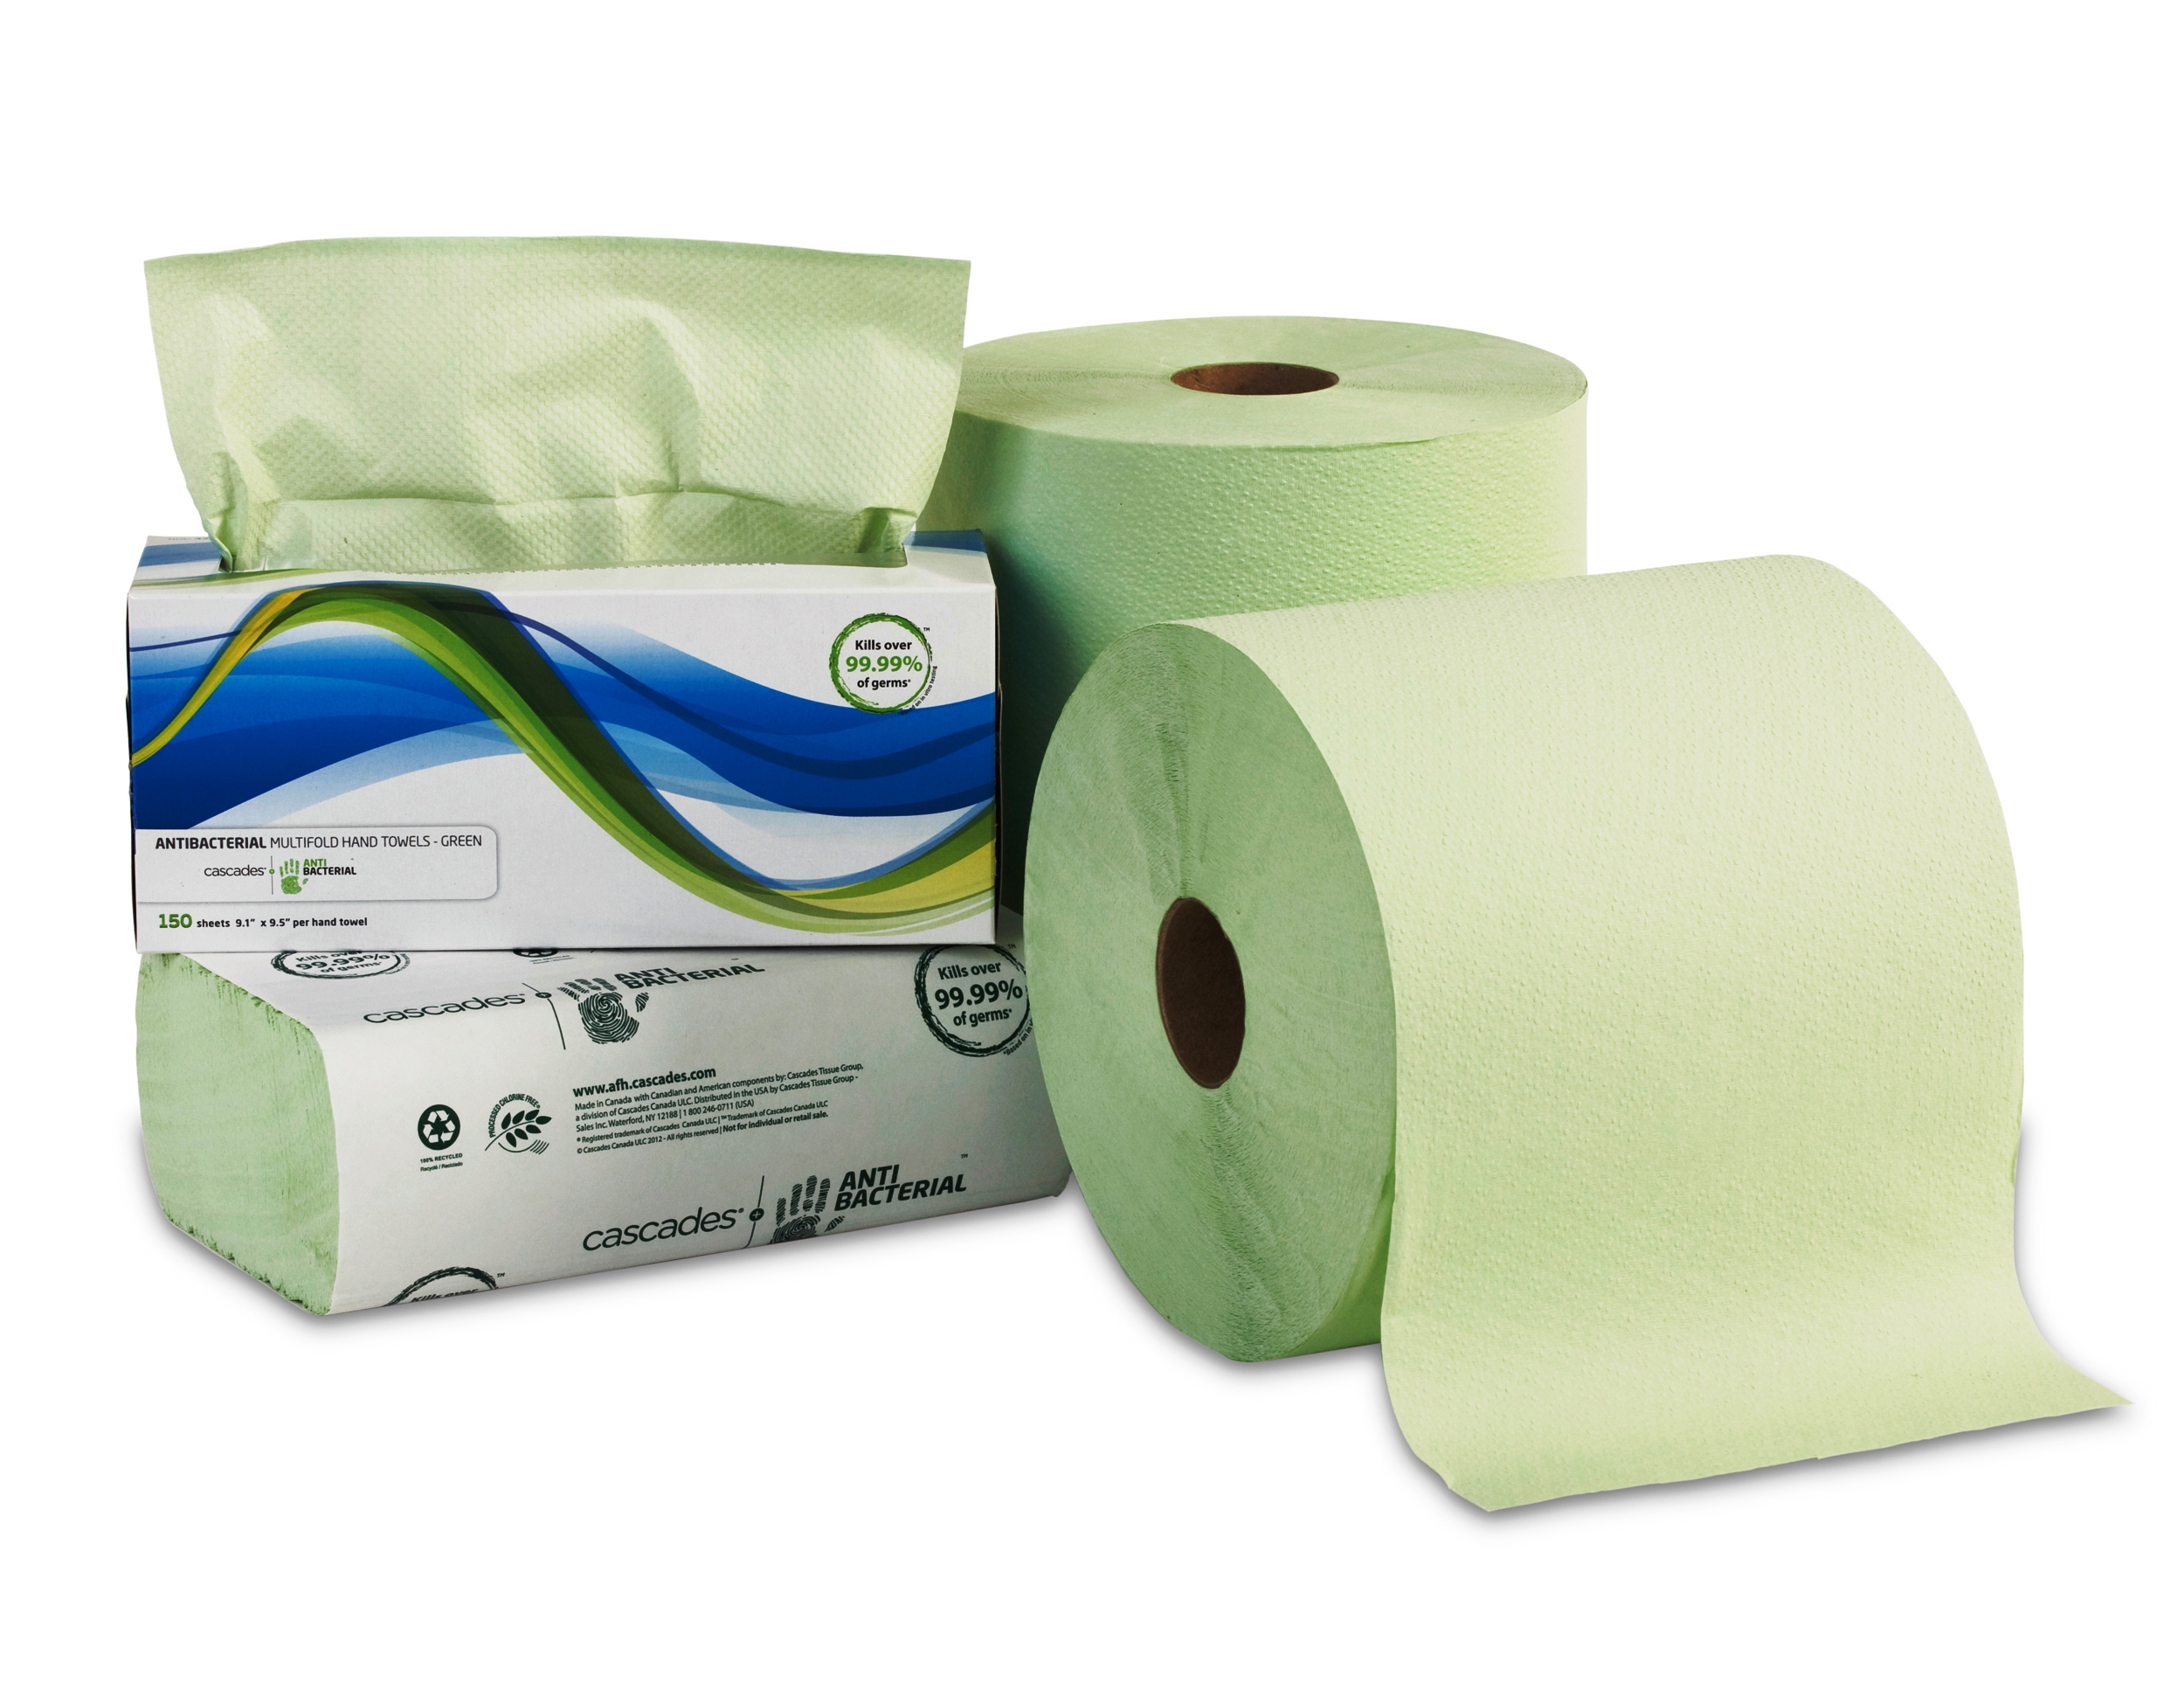 Cascades Tissue Brings First Antibacterial Paper Towel to U.S. Market